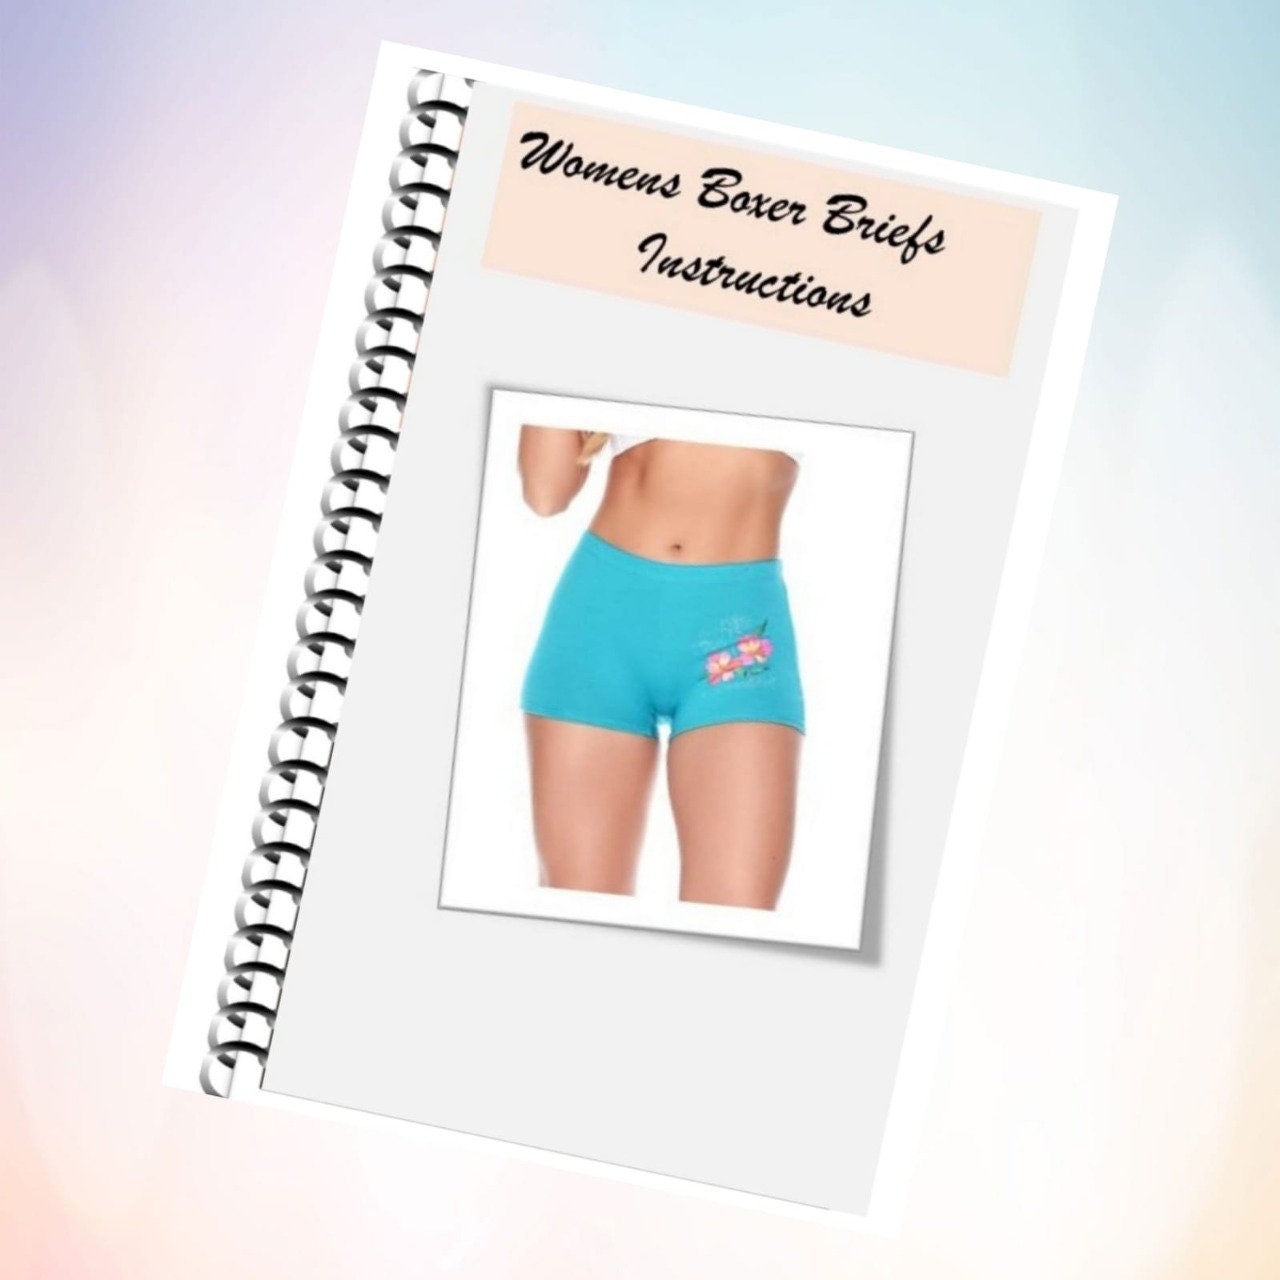 Sewing Pattern for Women's Boxer Briefs Sizes XS to 4XL Sewing Pattern in  PDF 